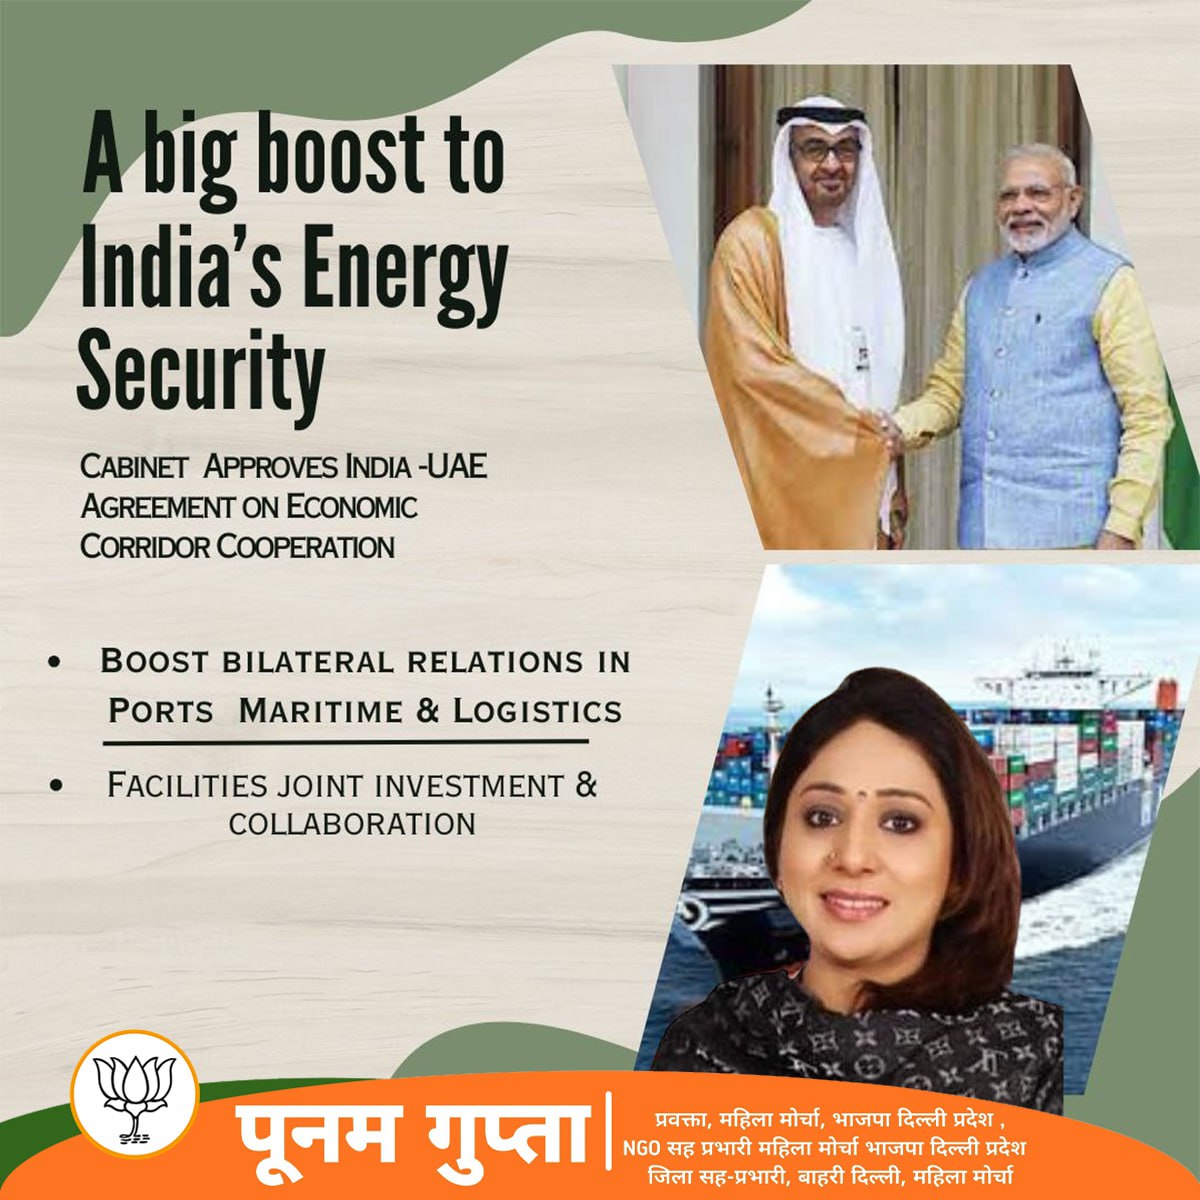 A green light for India's energy security as the Cabinet approves the India-UAE Economic Corridor Agreement. This deal strengthens ties in ports, shipping, and logistics, further opening doors for joint investments and a more secure energy future for India. 

#CabinetDecisions…